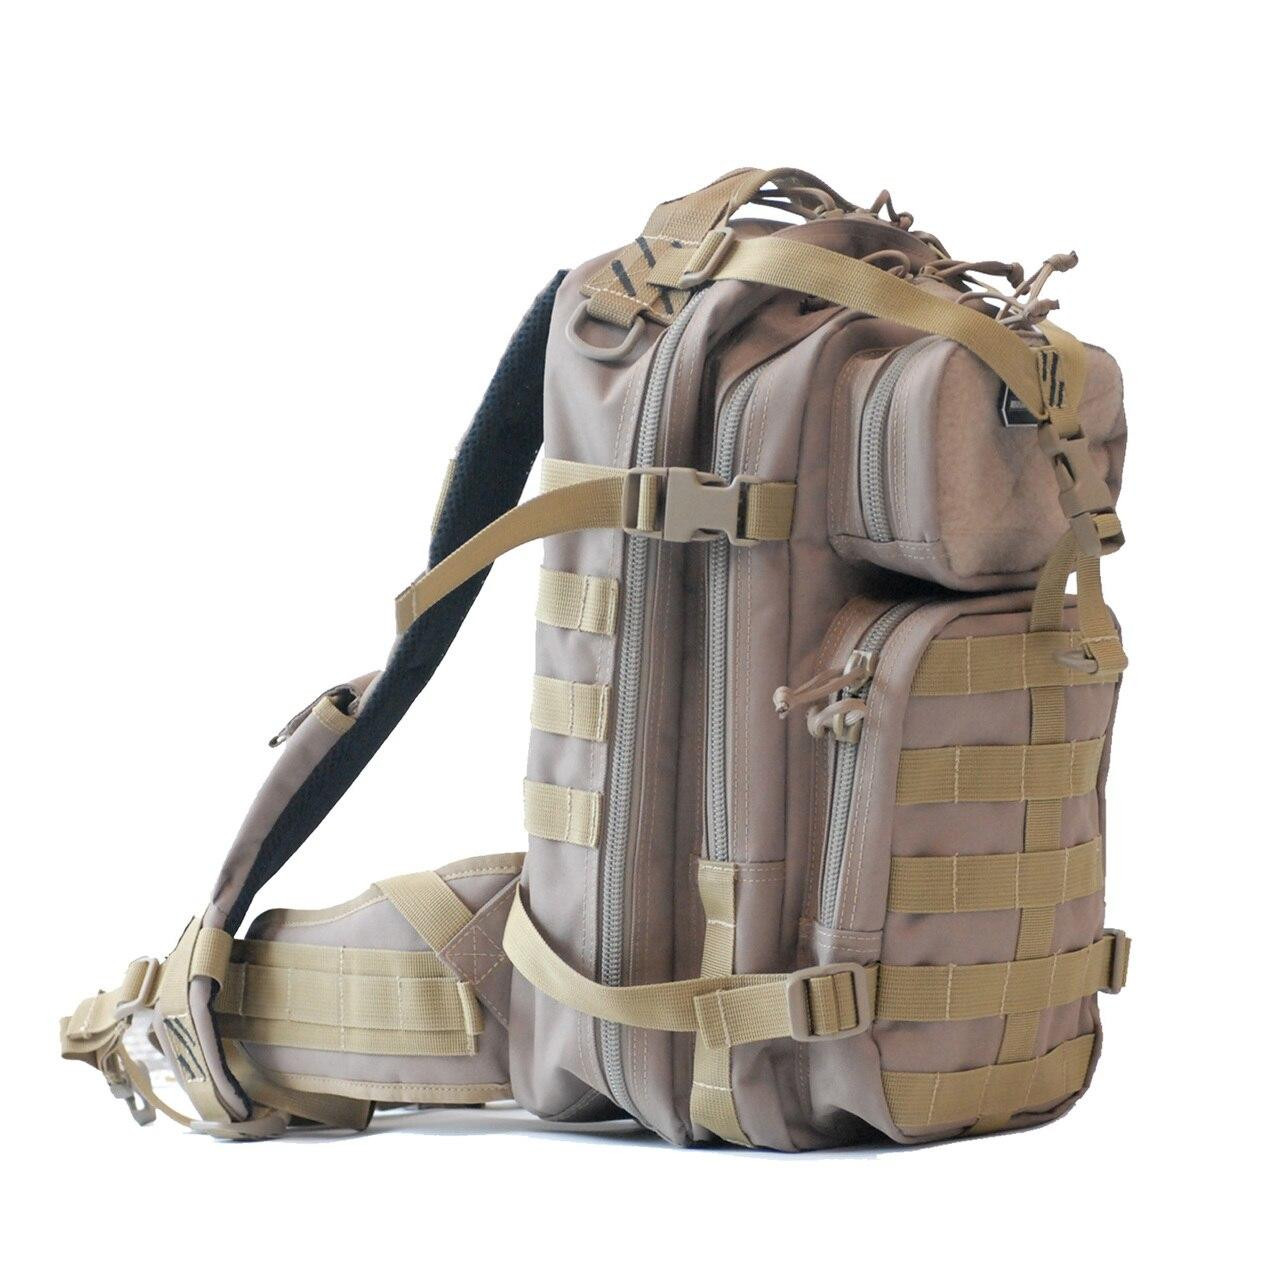 G-Outdoors, Inc G-outdrs Gps Tac Bugout Backpack Tan 819763011310